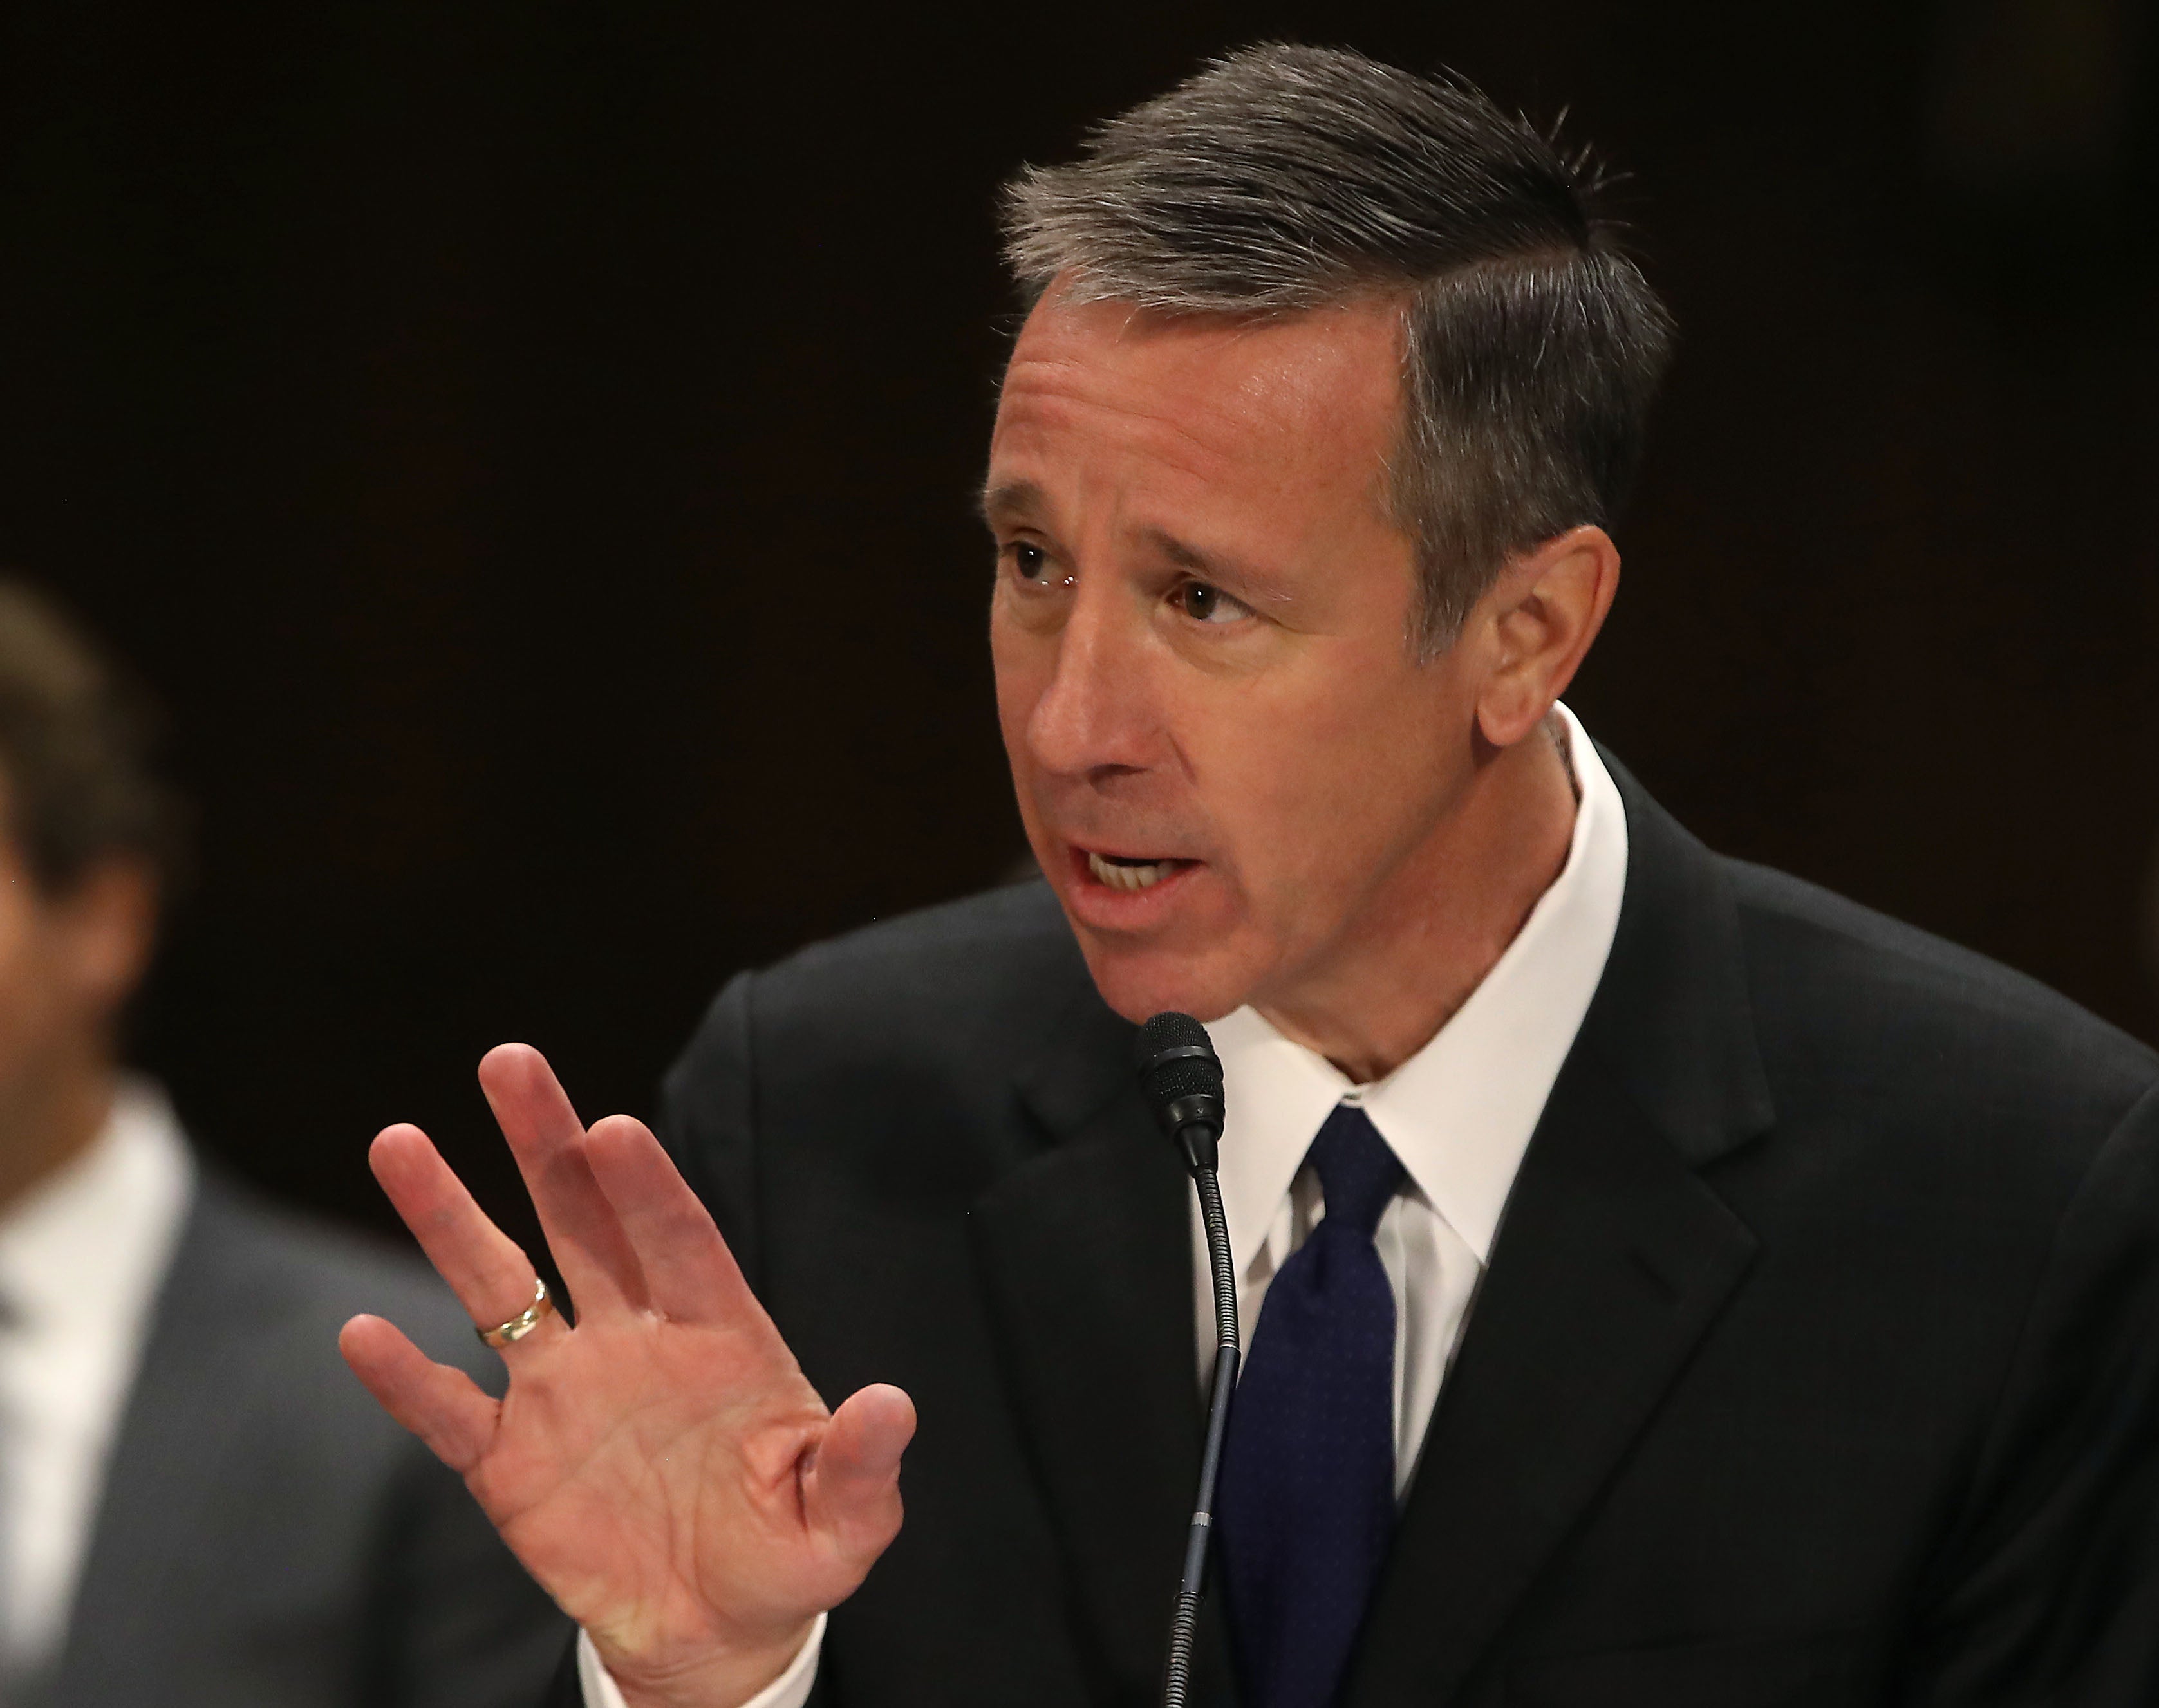 Arne Sorenson, CEO of Marriott International, testifies during a Senate Homeland Security and Governmental Affairs Subcommittee hearing on 7 March, 2019